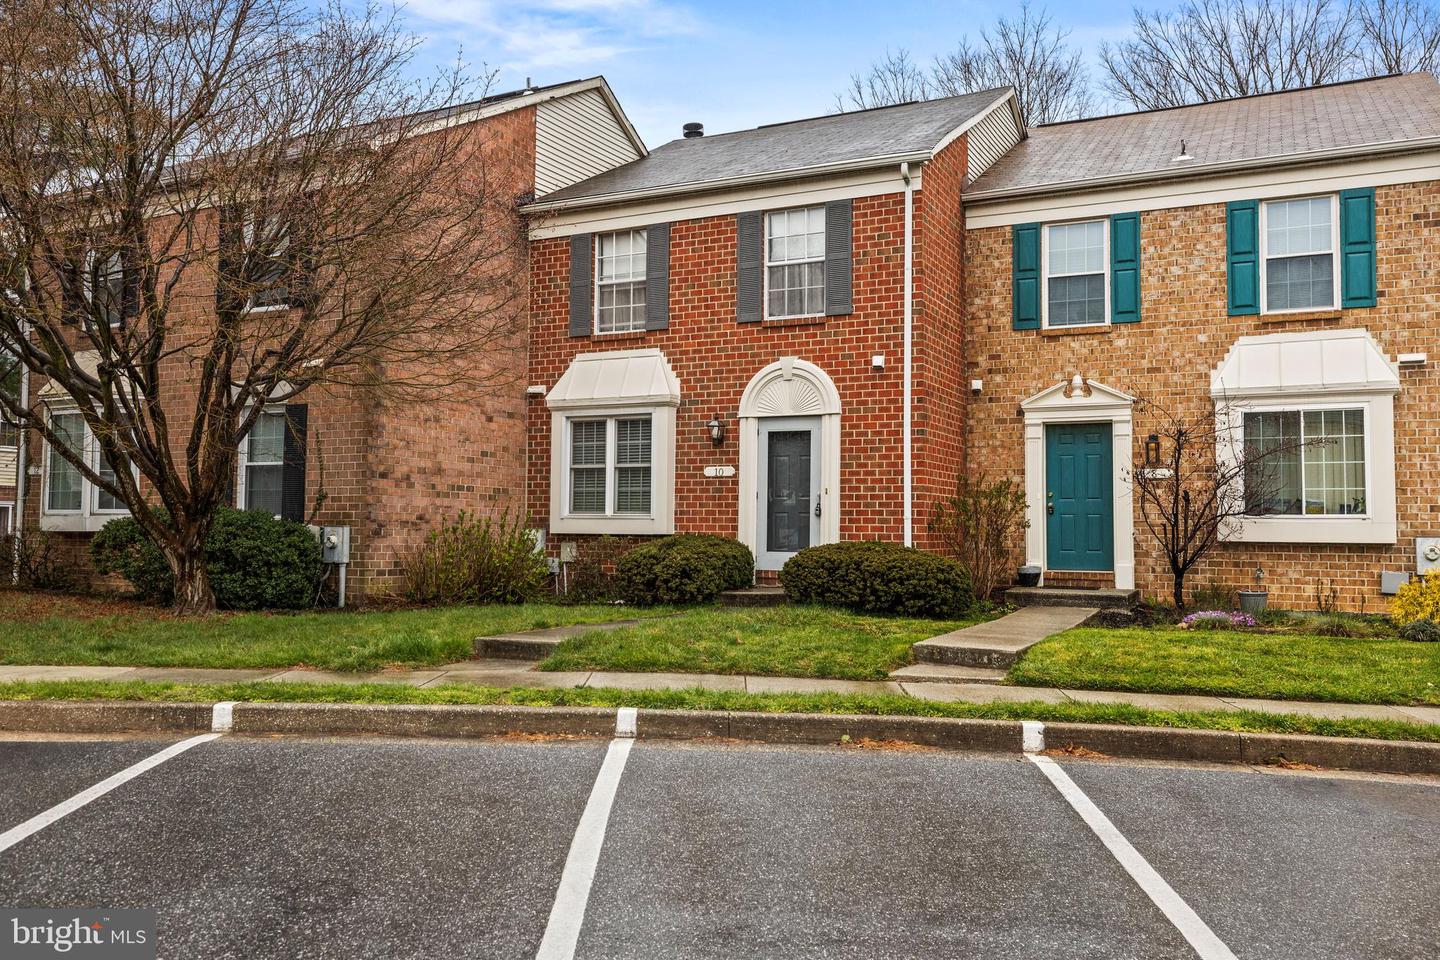 View Owings Mills, MD 21117 townhome